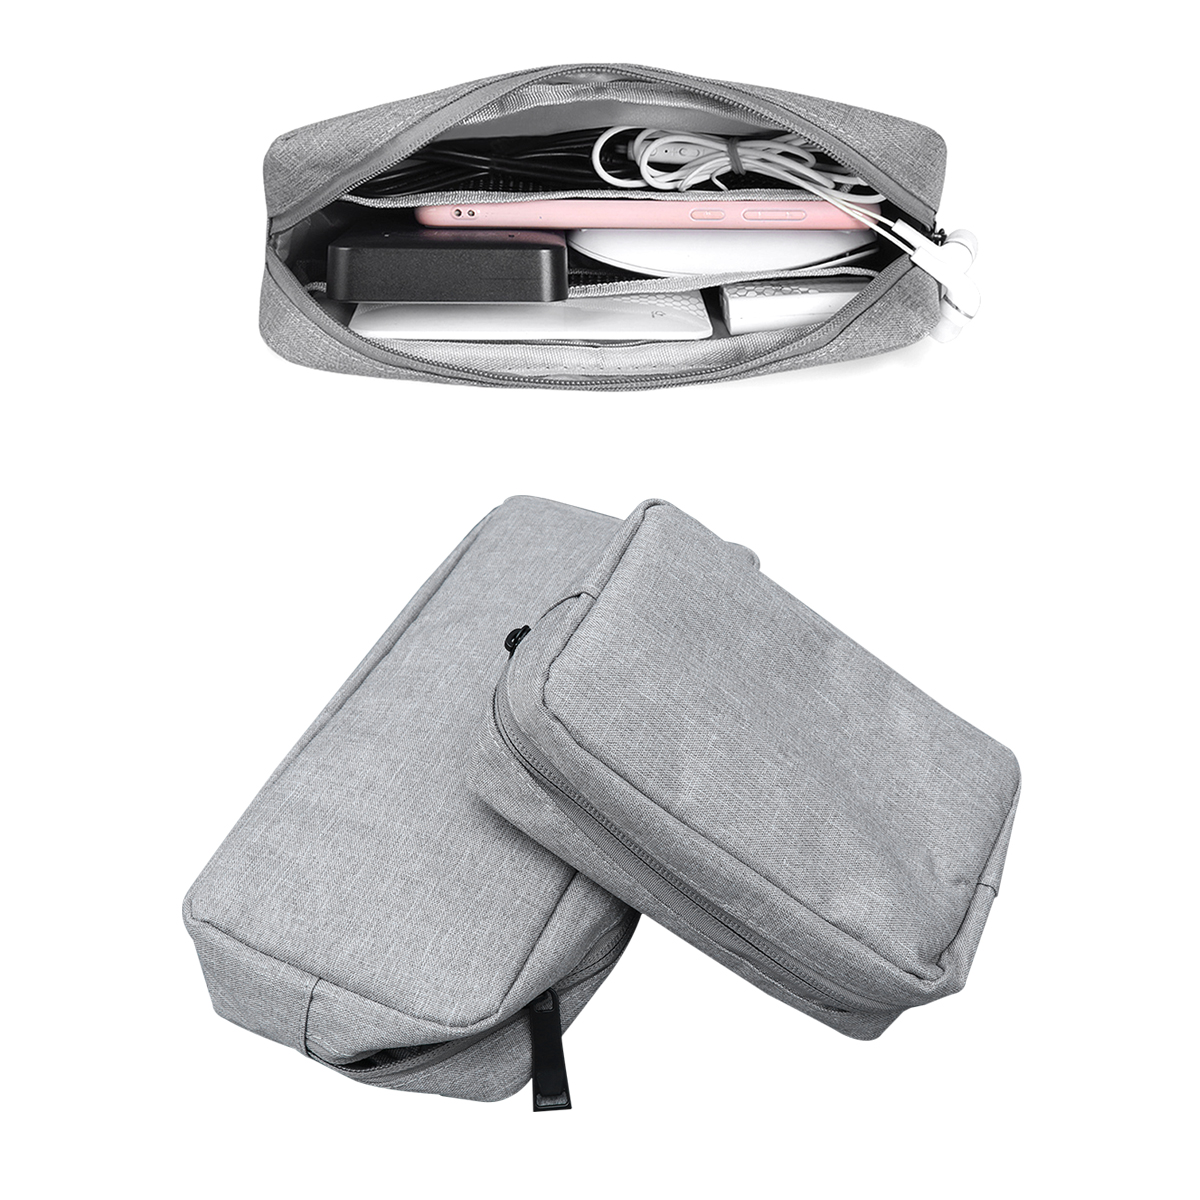 2pcs Digital Accessories Storage Bag Electronics Protection Pouch Organizer for Charger USB Cable Earphone (Grey, Large Size+Small Size) - image 4 of 6